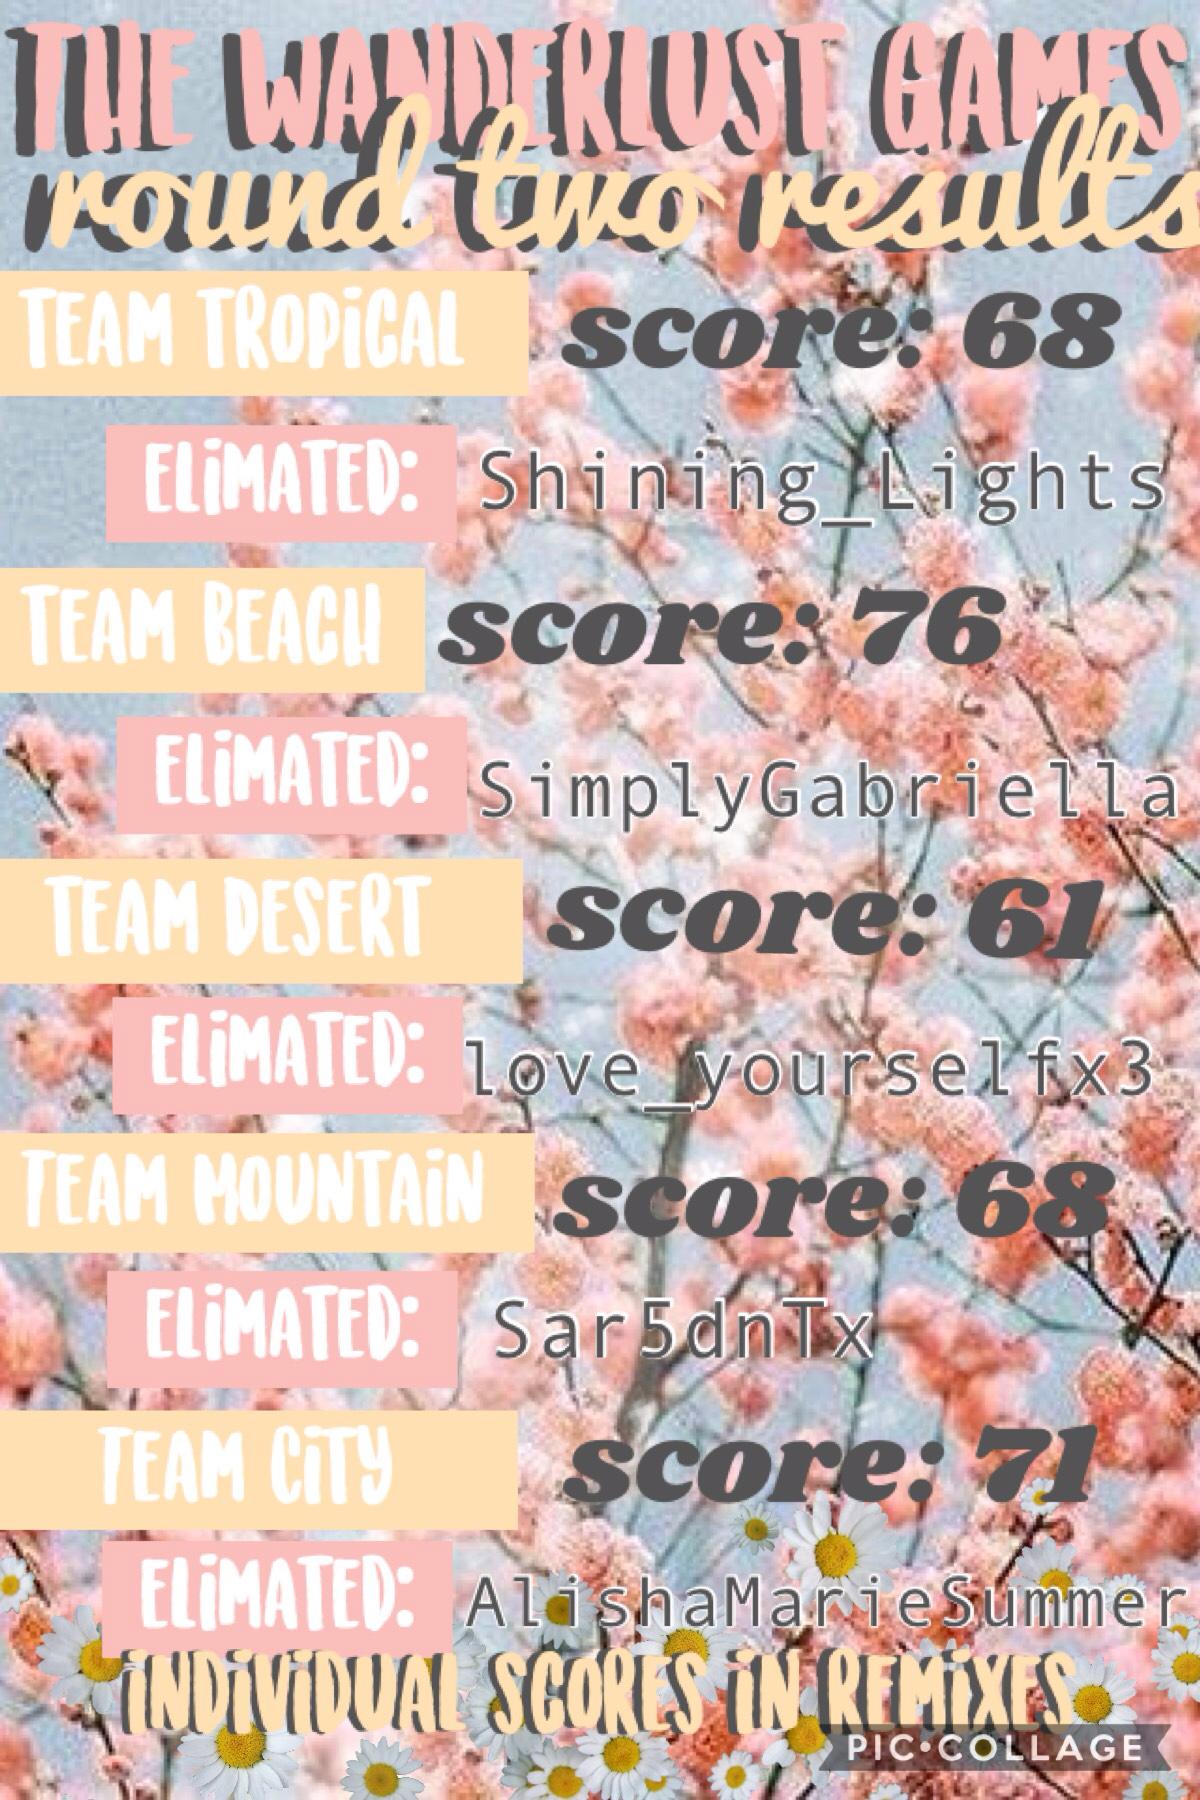 ROUND 2 RESULTS! Also please pick your team icons soon. Sorry for this bad layout.